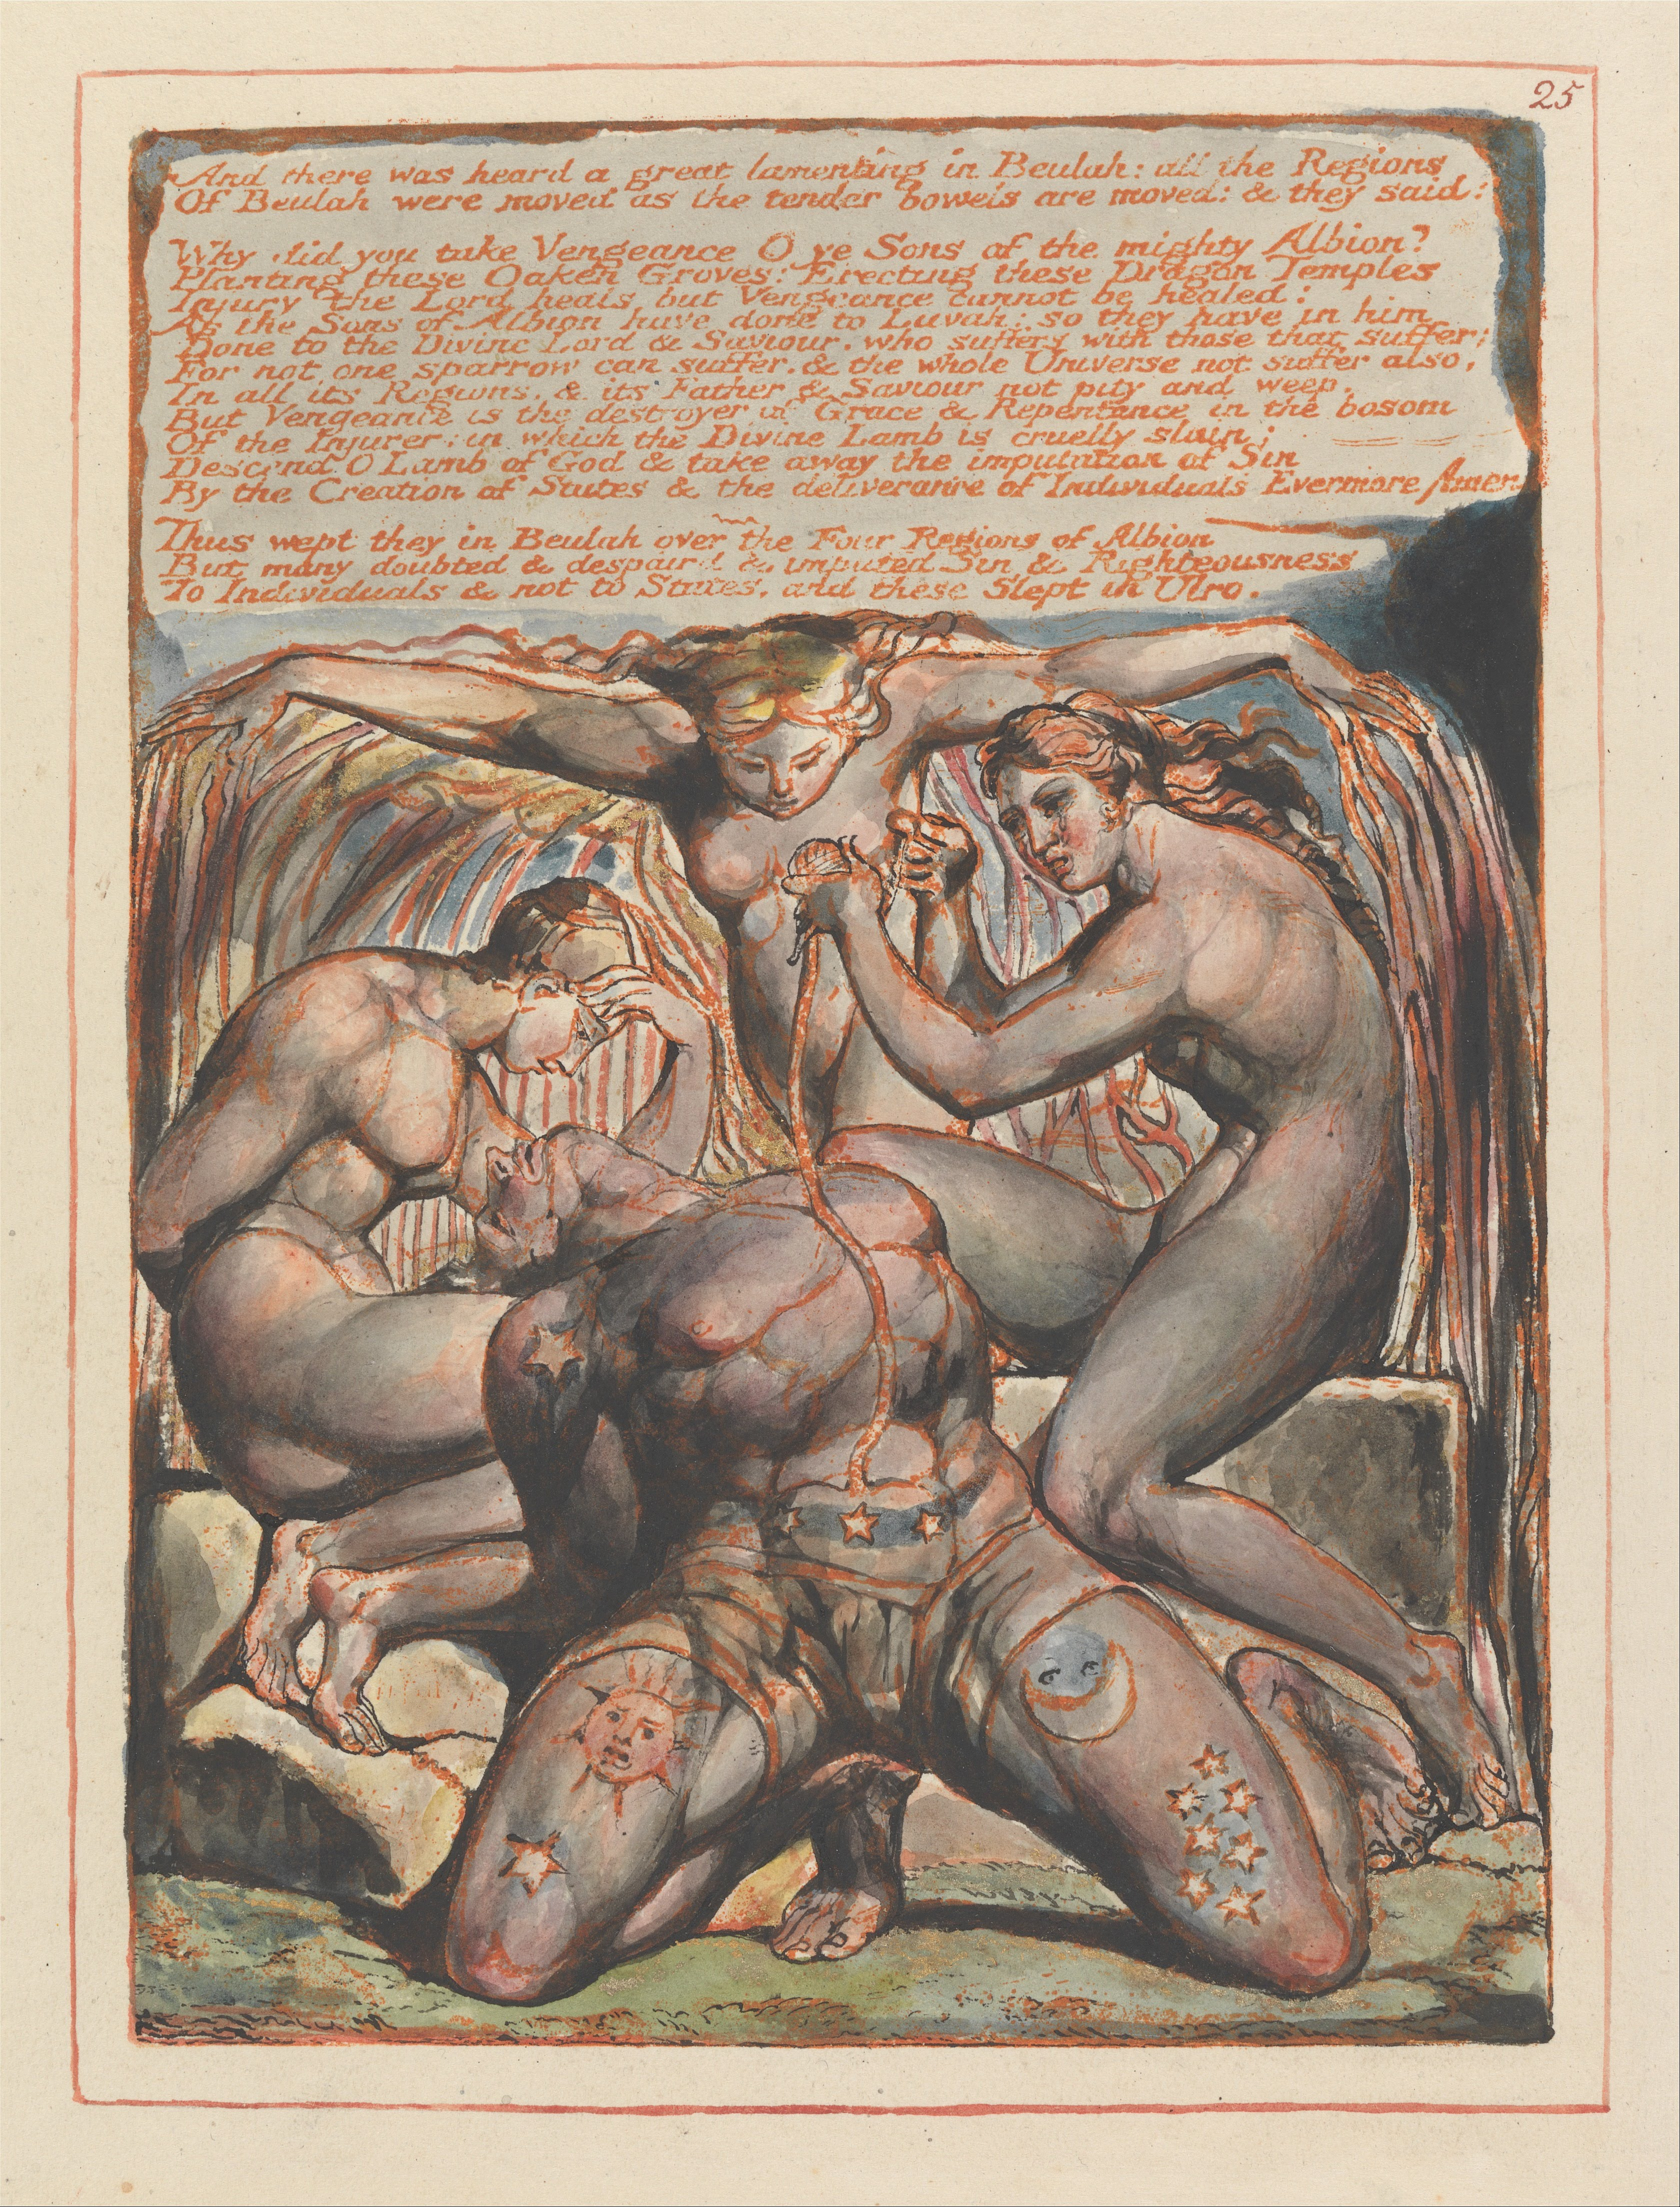 William_Blake_-_Jerusalem_Plate_25_22And_there_was_heard....22_-_Google_Art_Project.jpg